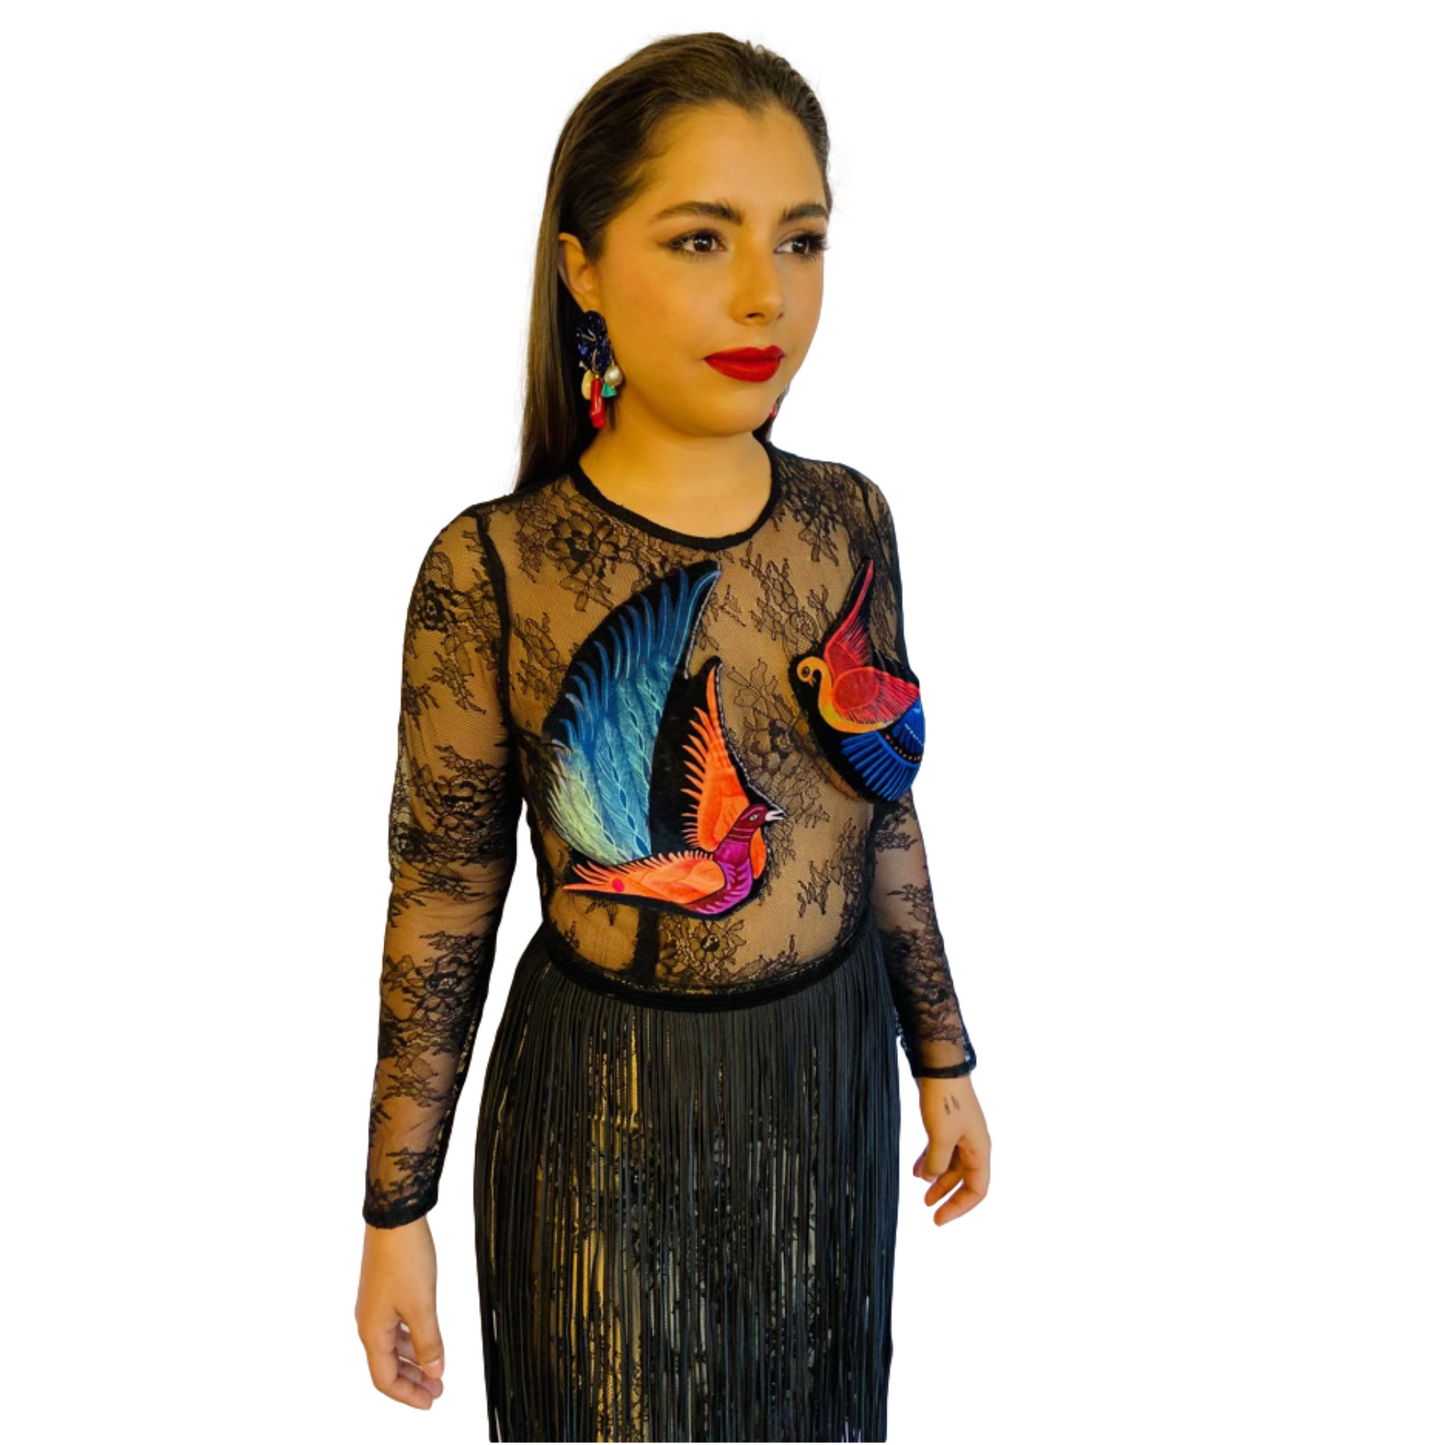 Mexican Fashion Embroidered Dress - Nayibi Mexico Amate Birds Black Dress Colores Decor